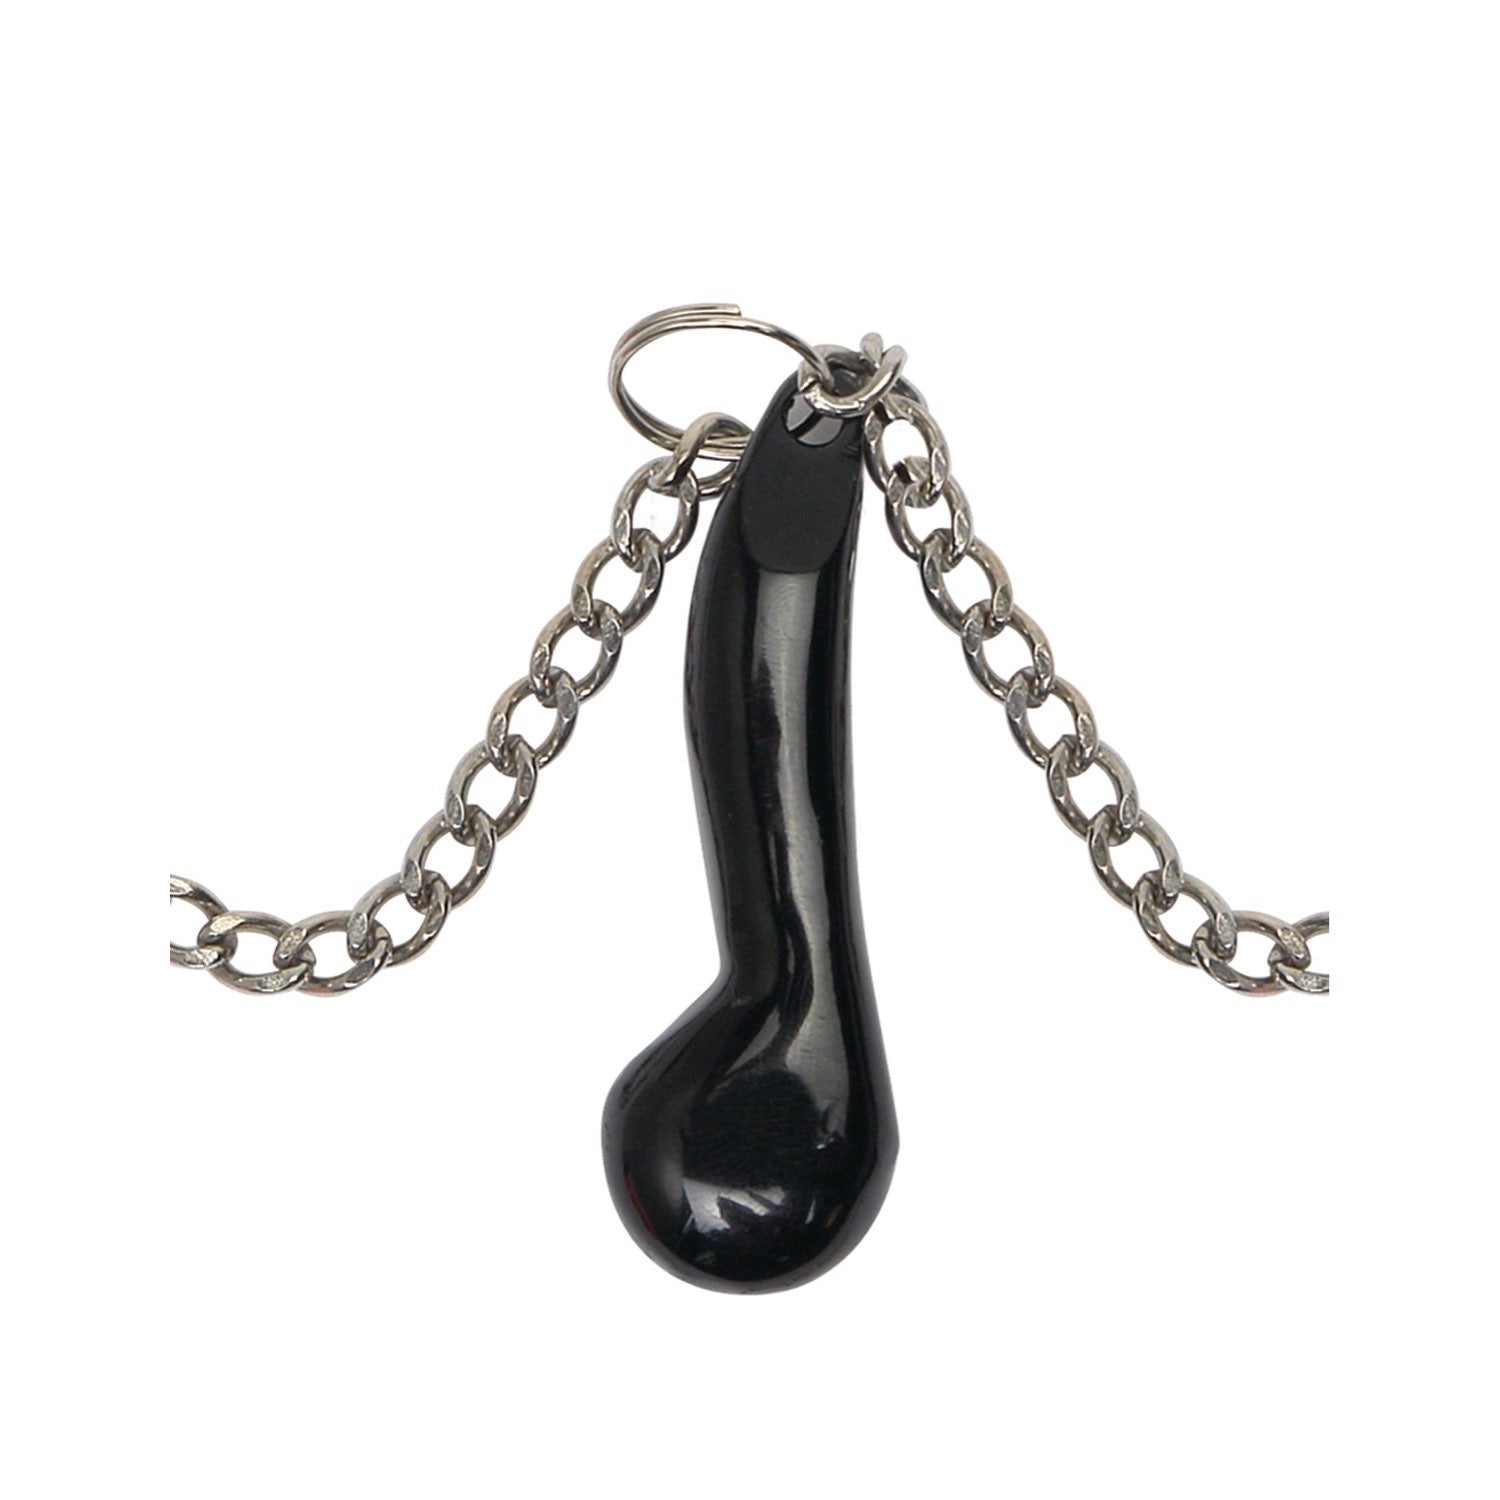 Fetish Fantasy Series Heavyweight Nipple Clamps - Metal Nipple Clamps by Pipedream